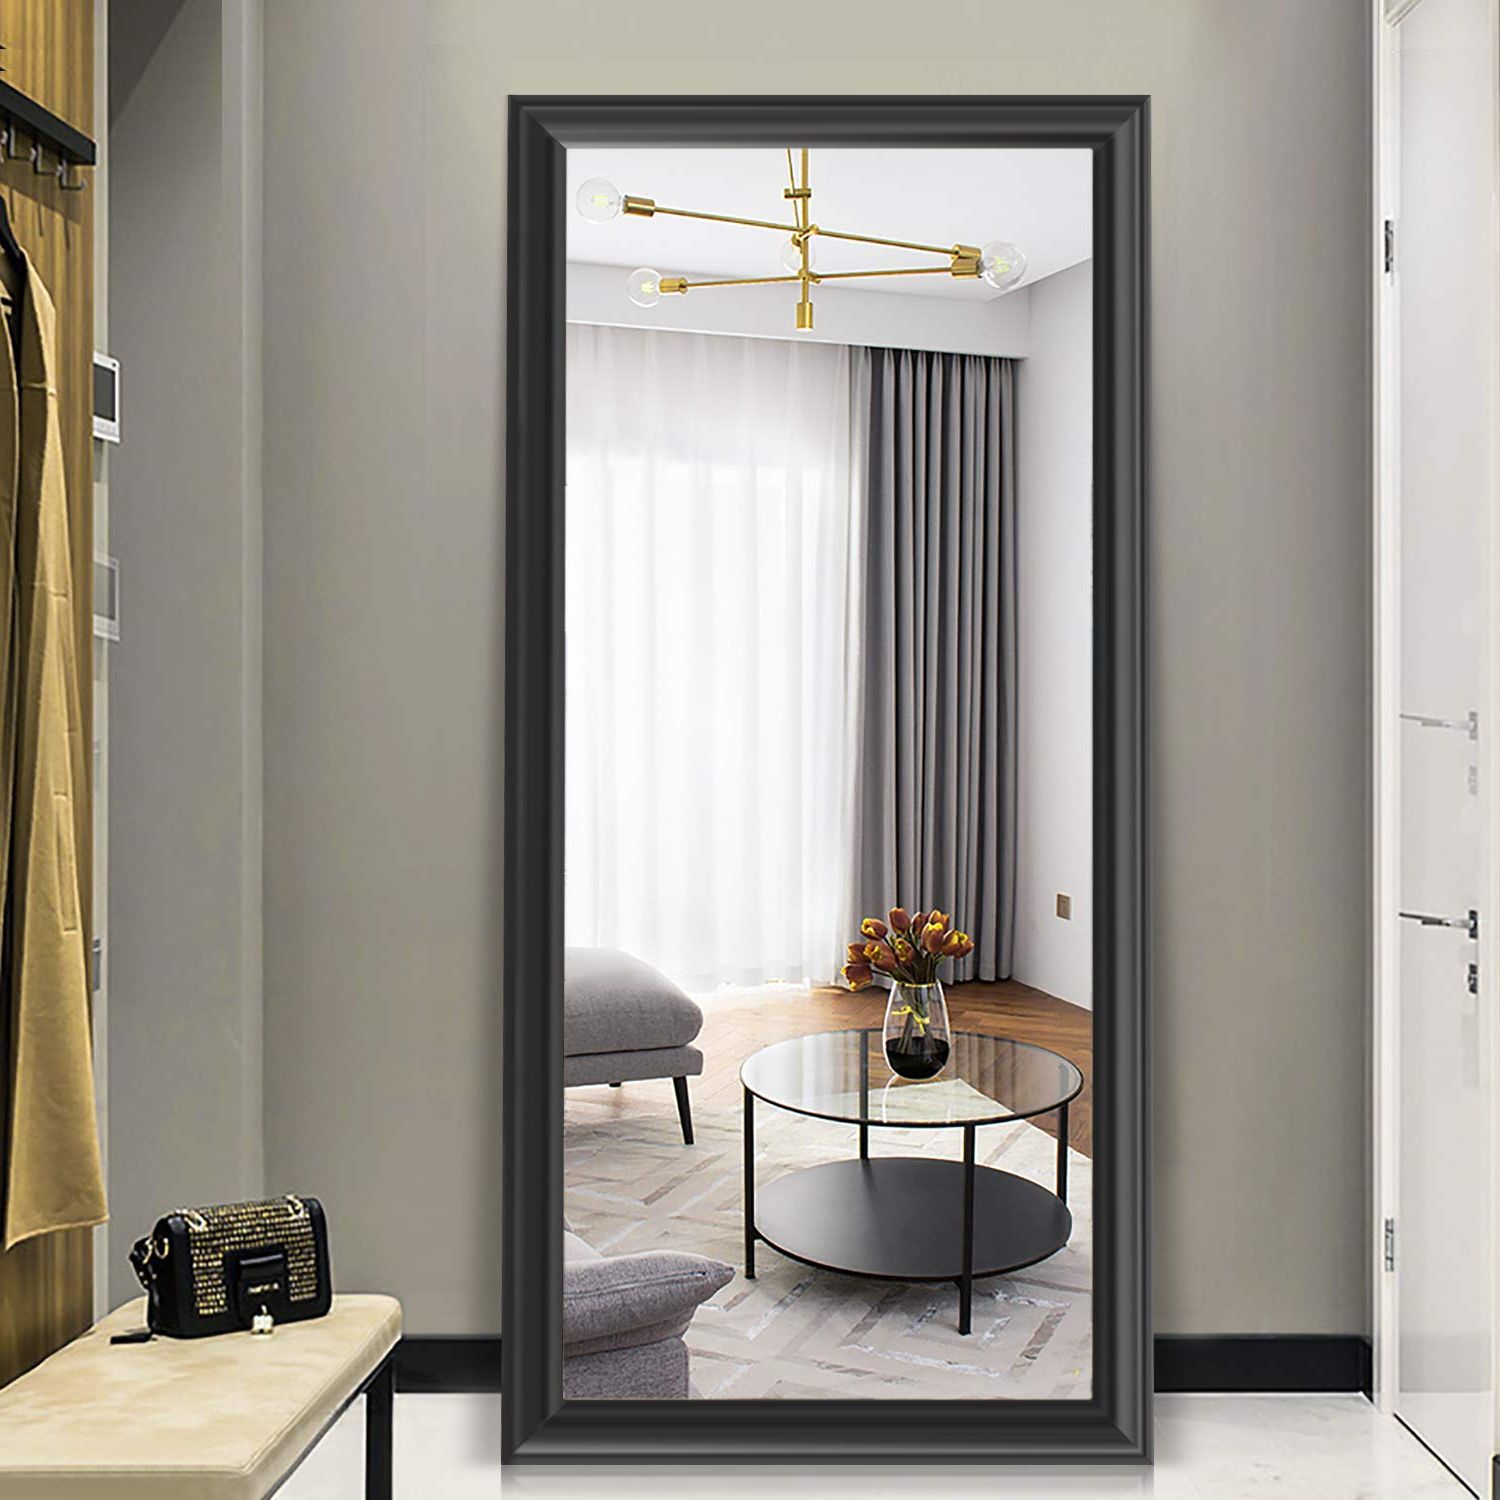 2019 Standing Wall Mirrors With Regard To Pexfix Full Length Mirror, Rectangular Wall Mounted Mirror, Bedroom Floor  Mirror Standing Or Hanging, 65"x22"(black) (View 19 of 20)